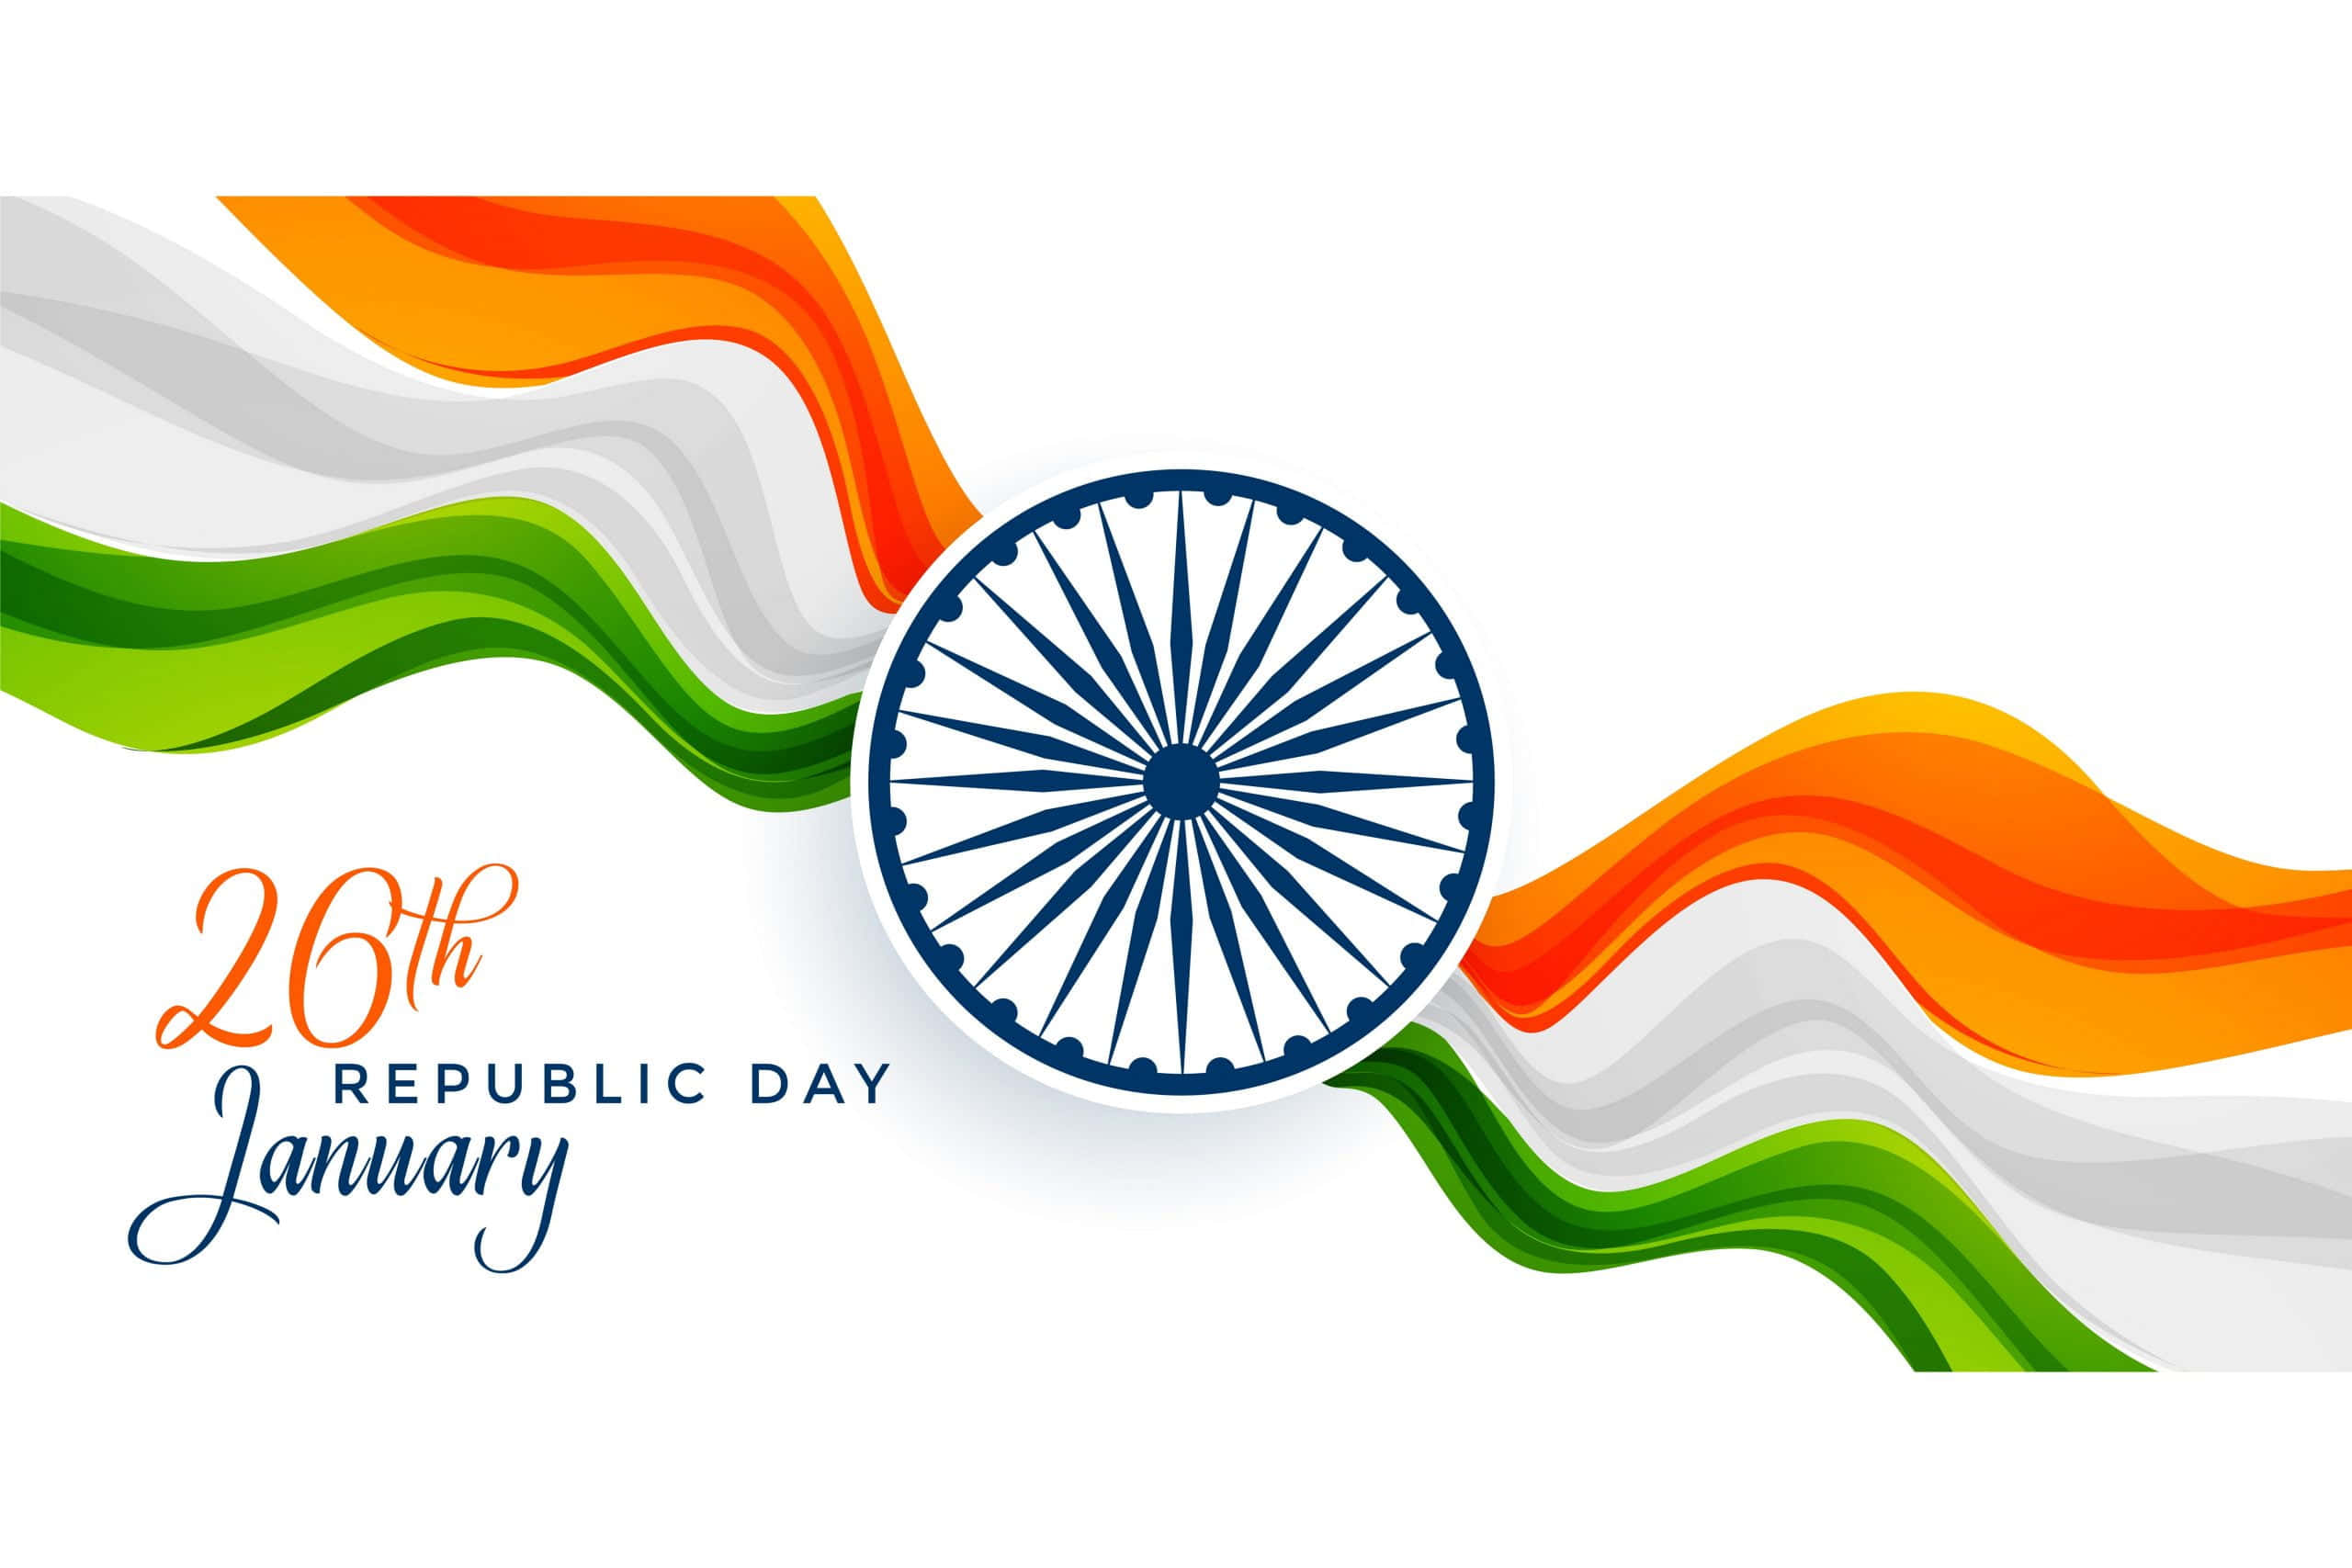 Republic Day January - Hd Wallpapers